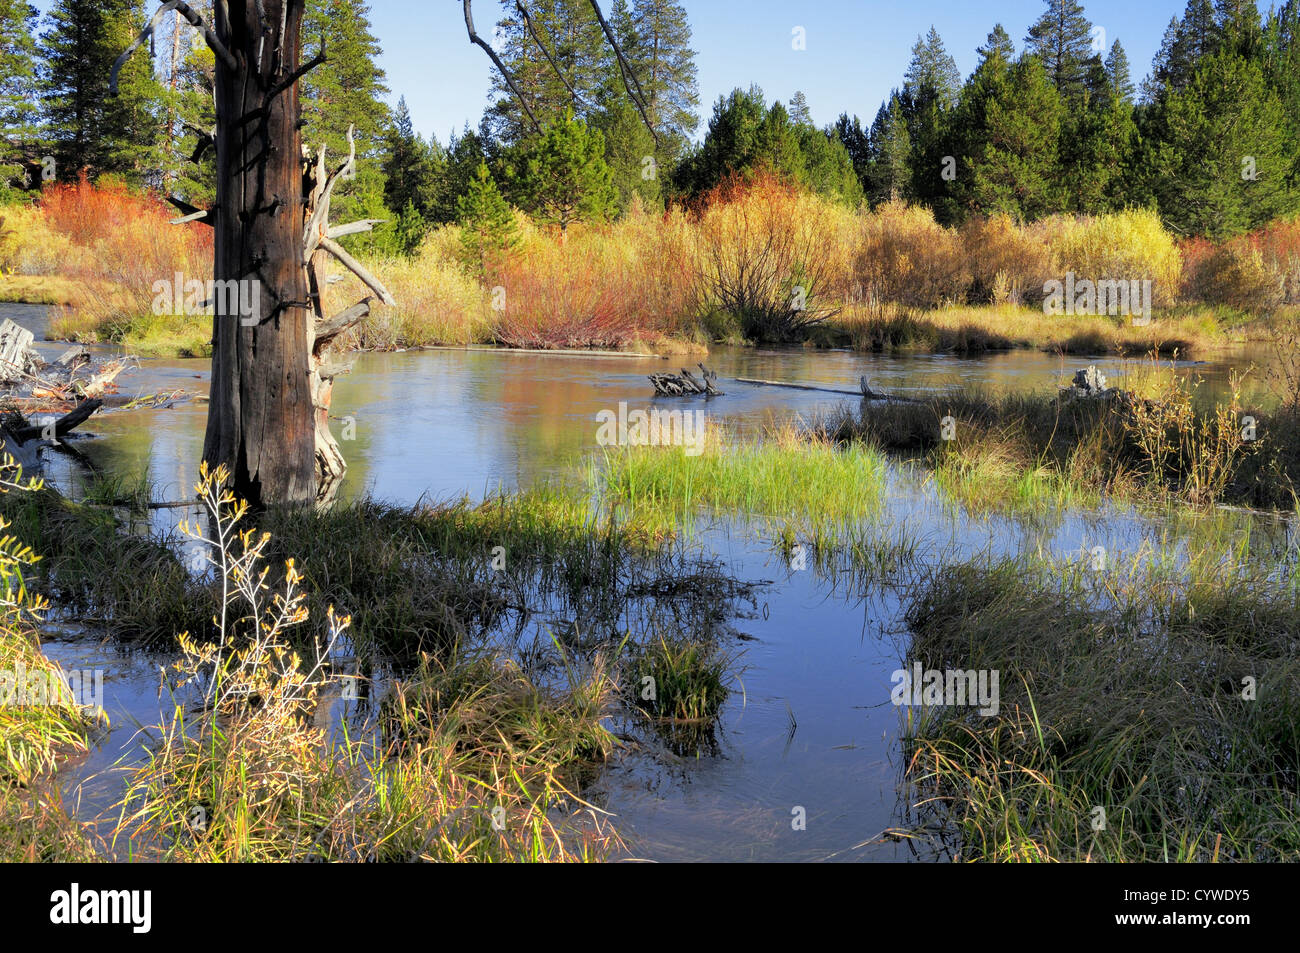 River marsh in the High Sierra mountains Stock Photo